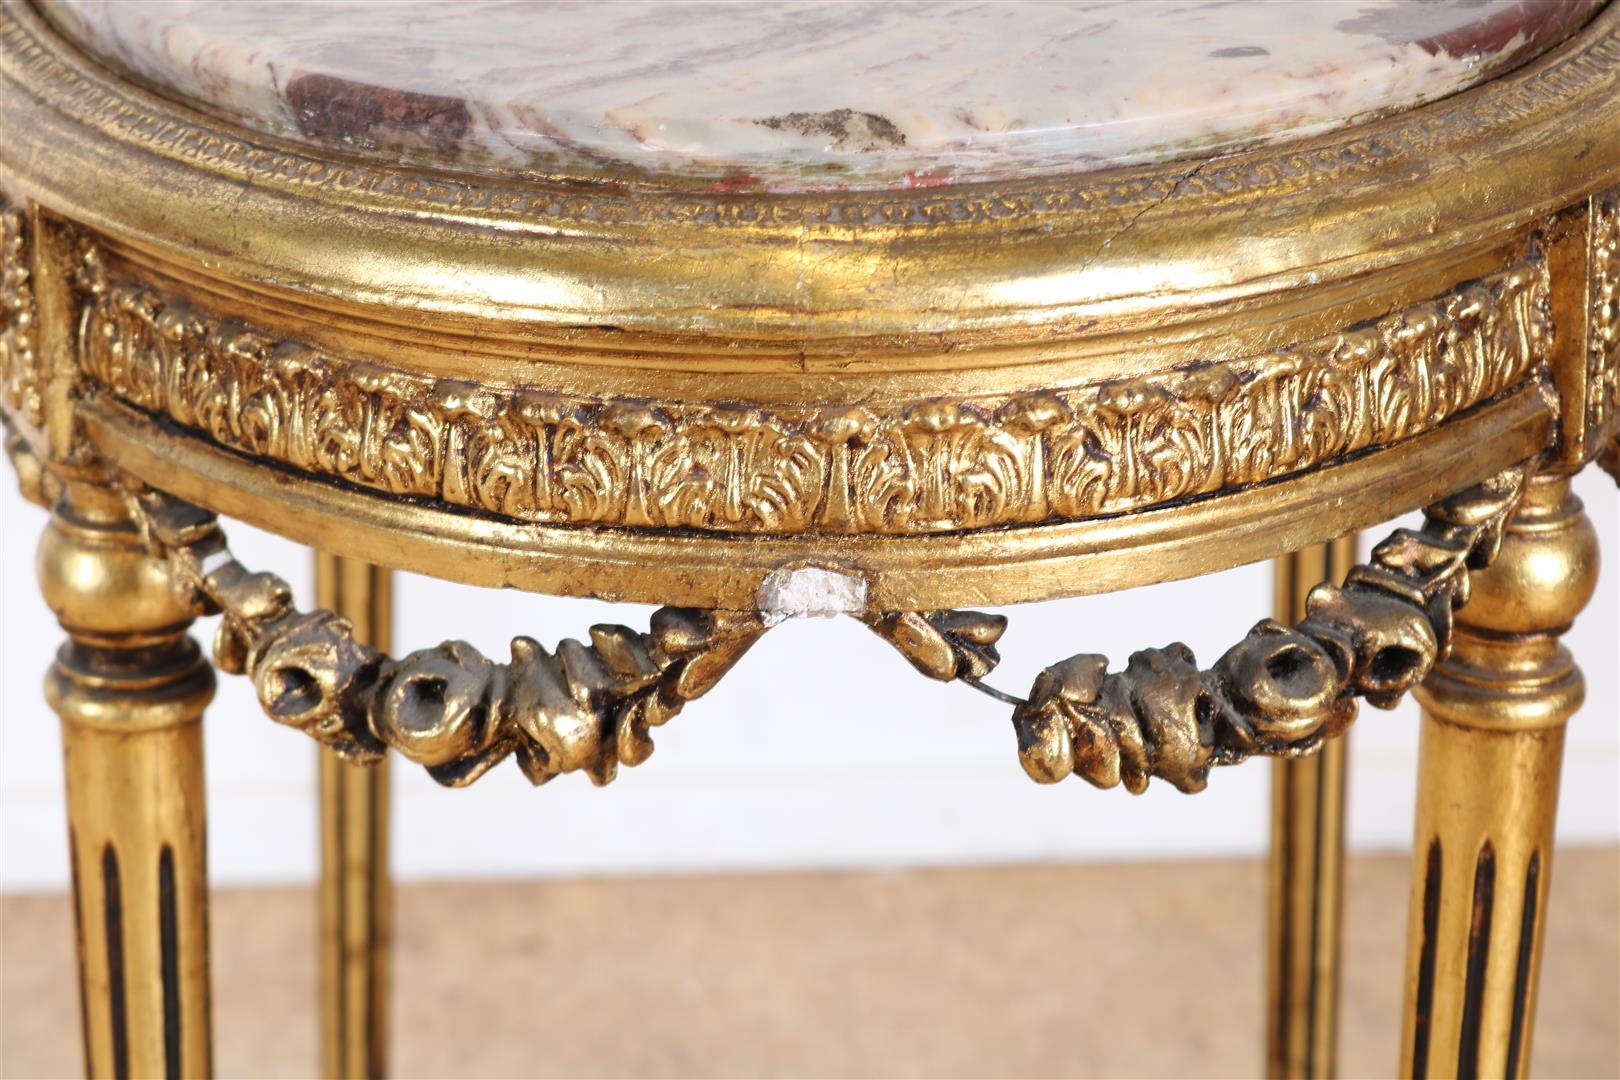 Gilded Louis XVI style side table with marble top on fluted legs connected by rules, 82 x73 x 53 - Image 5 of 5